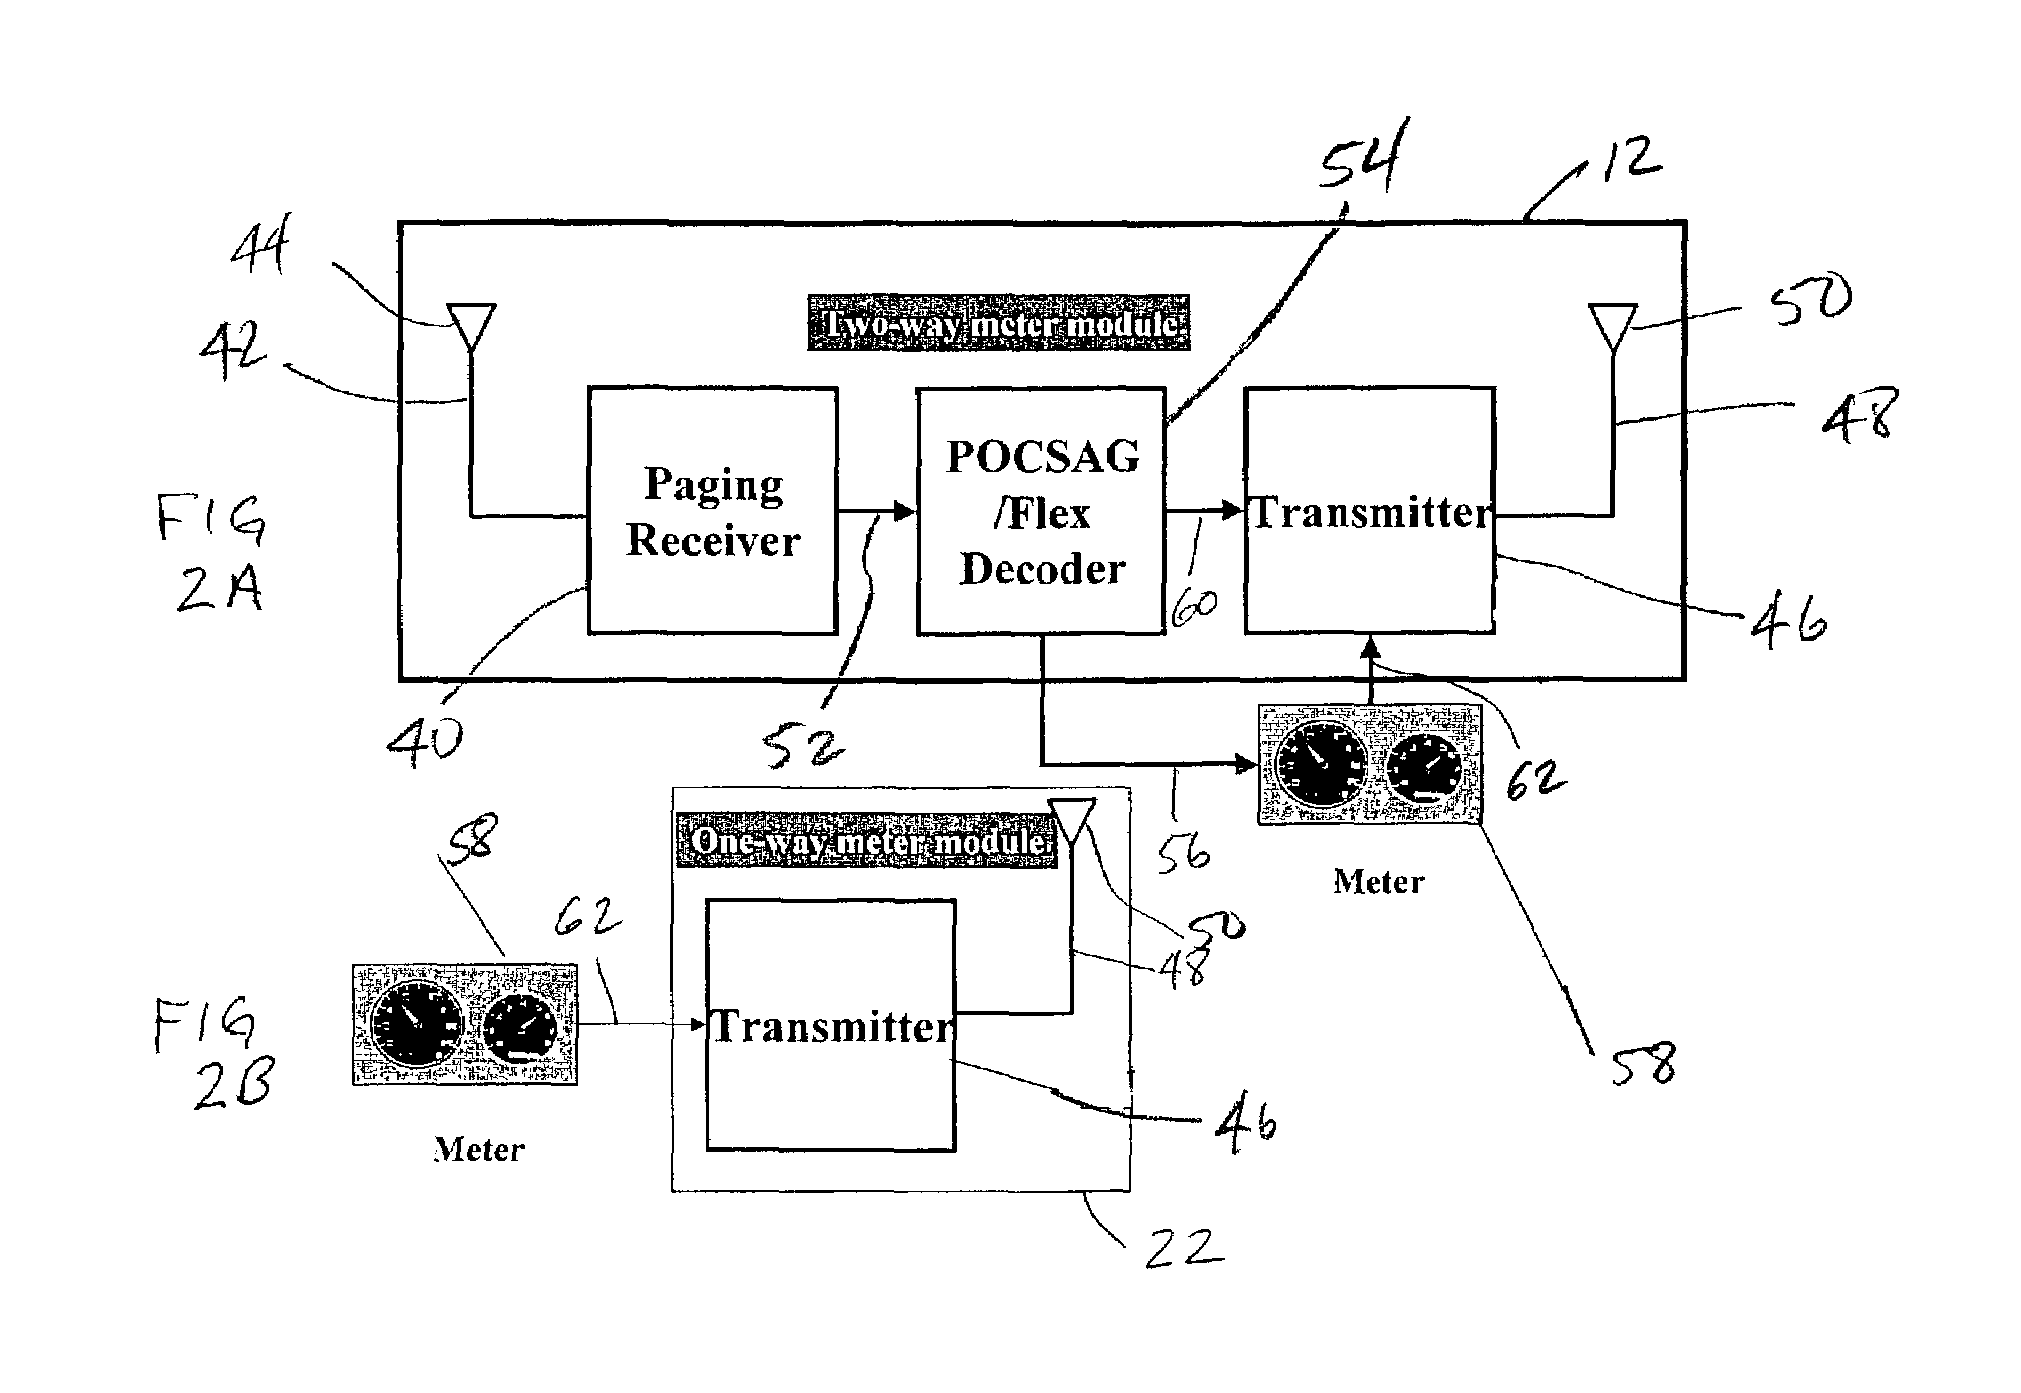 Modular wireless fixed network for wide-area metering data collection and meter module apparatus